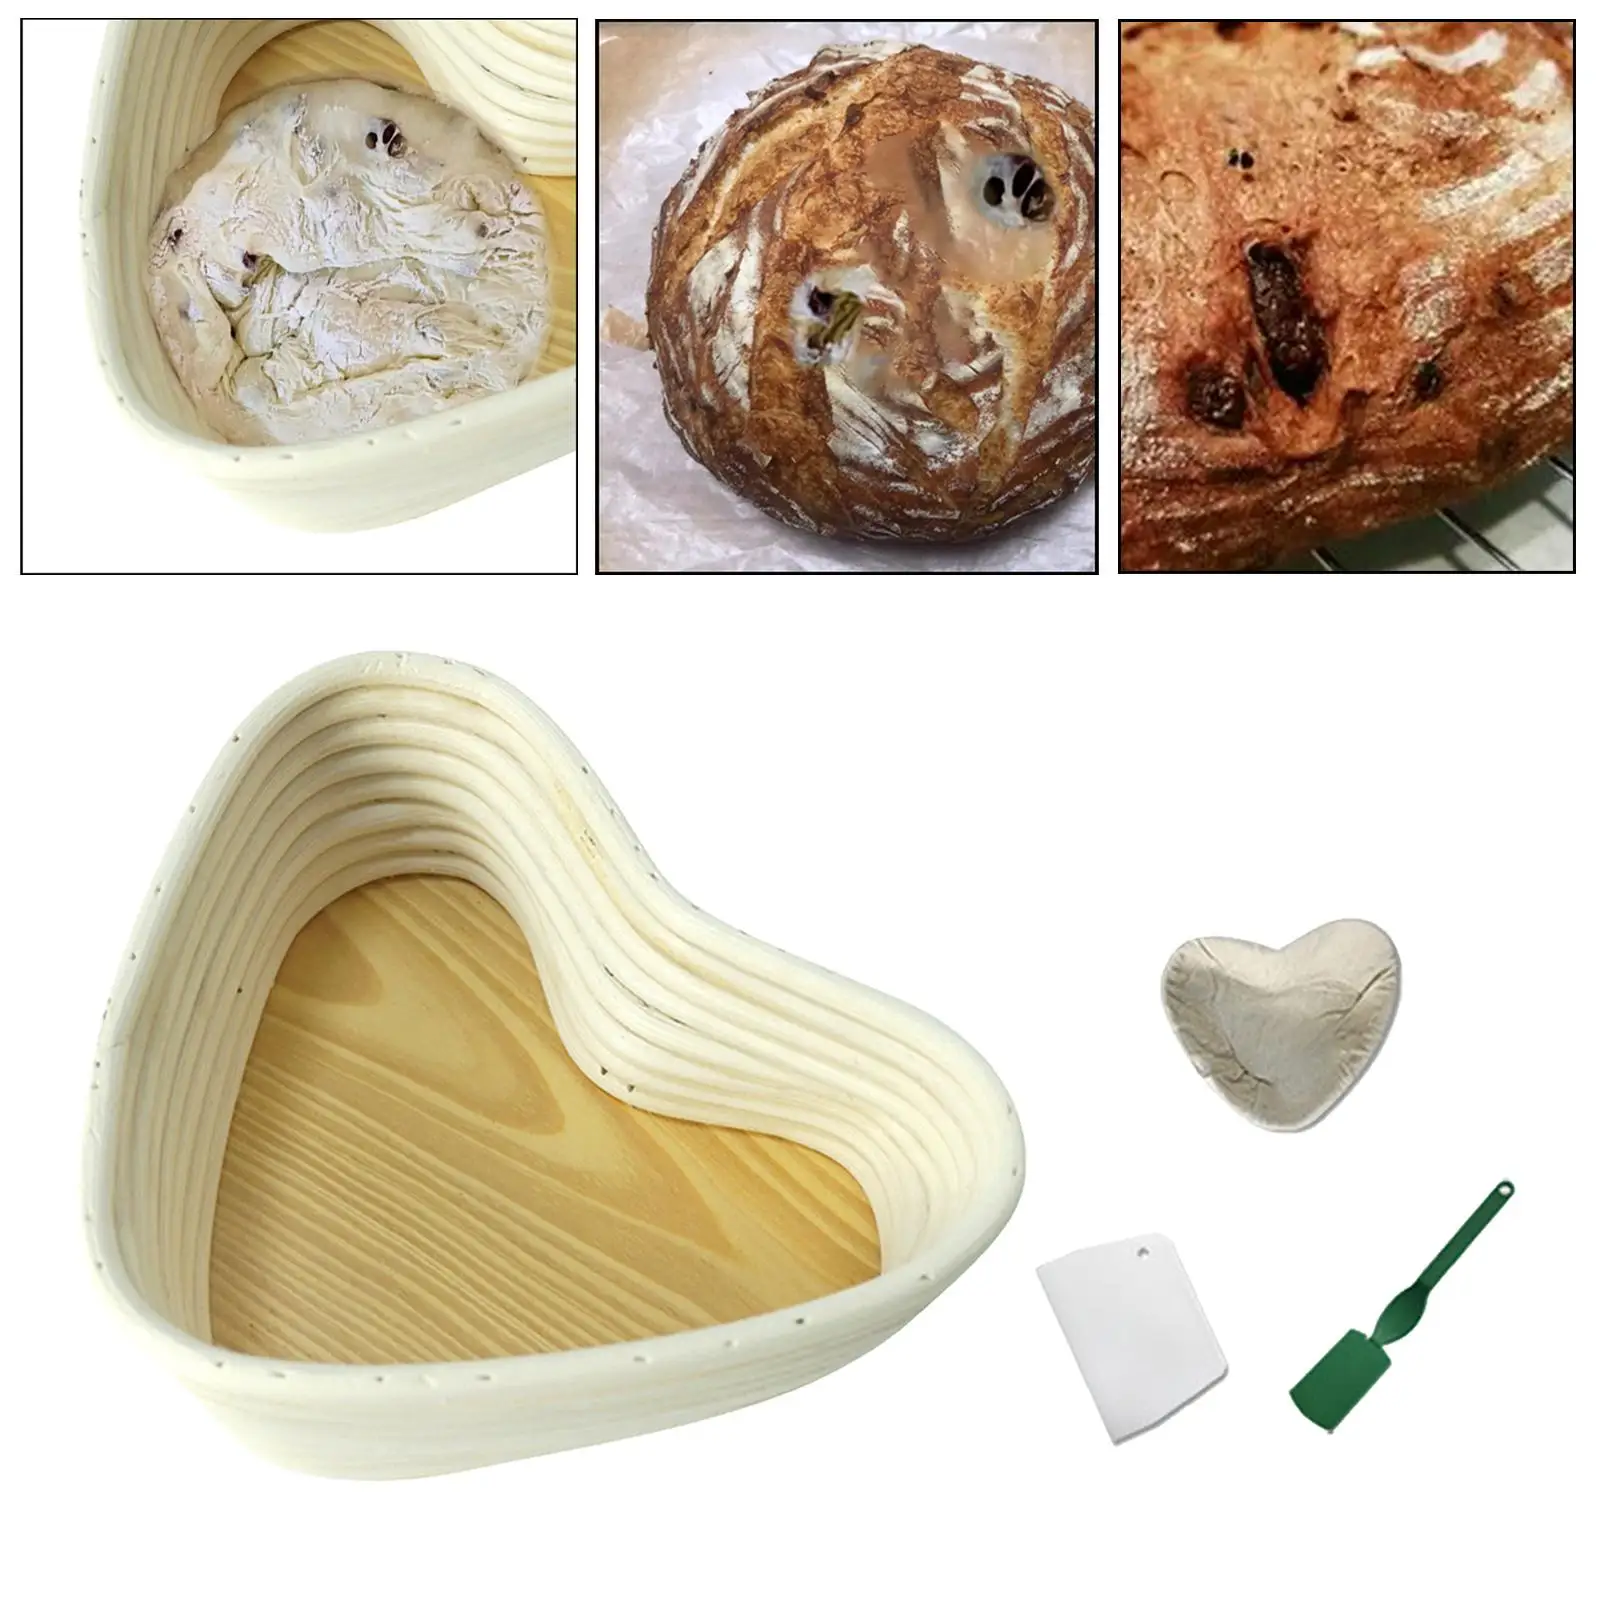 Rattan Proofing Basket Dough Cutter Professional Baking Tool with Cloth Liner Baking Supplies Kit Kitchen Accessories